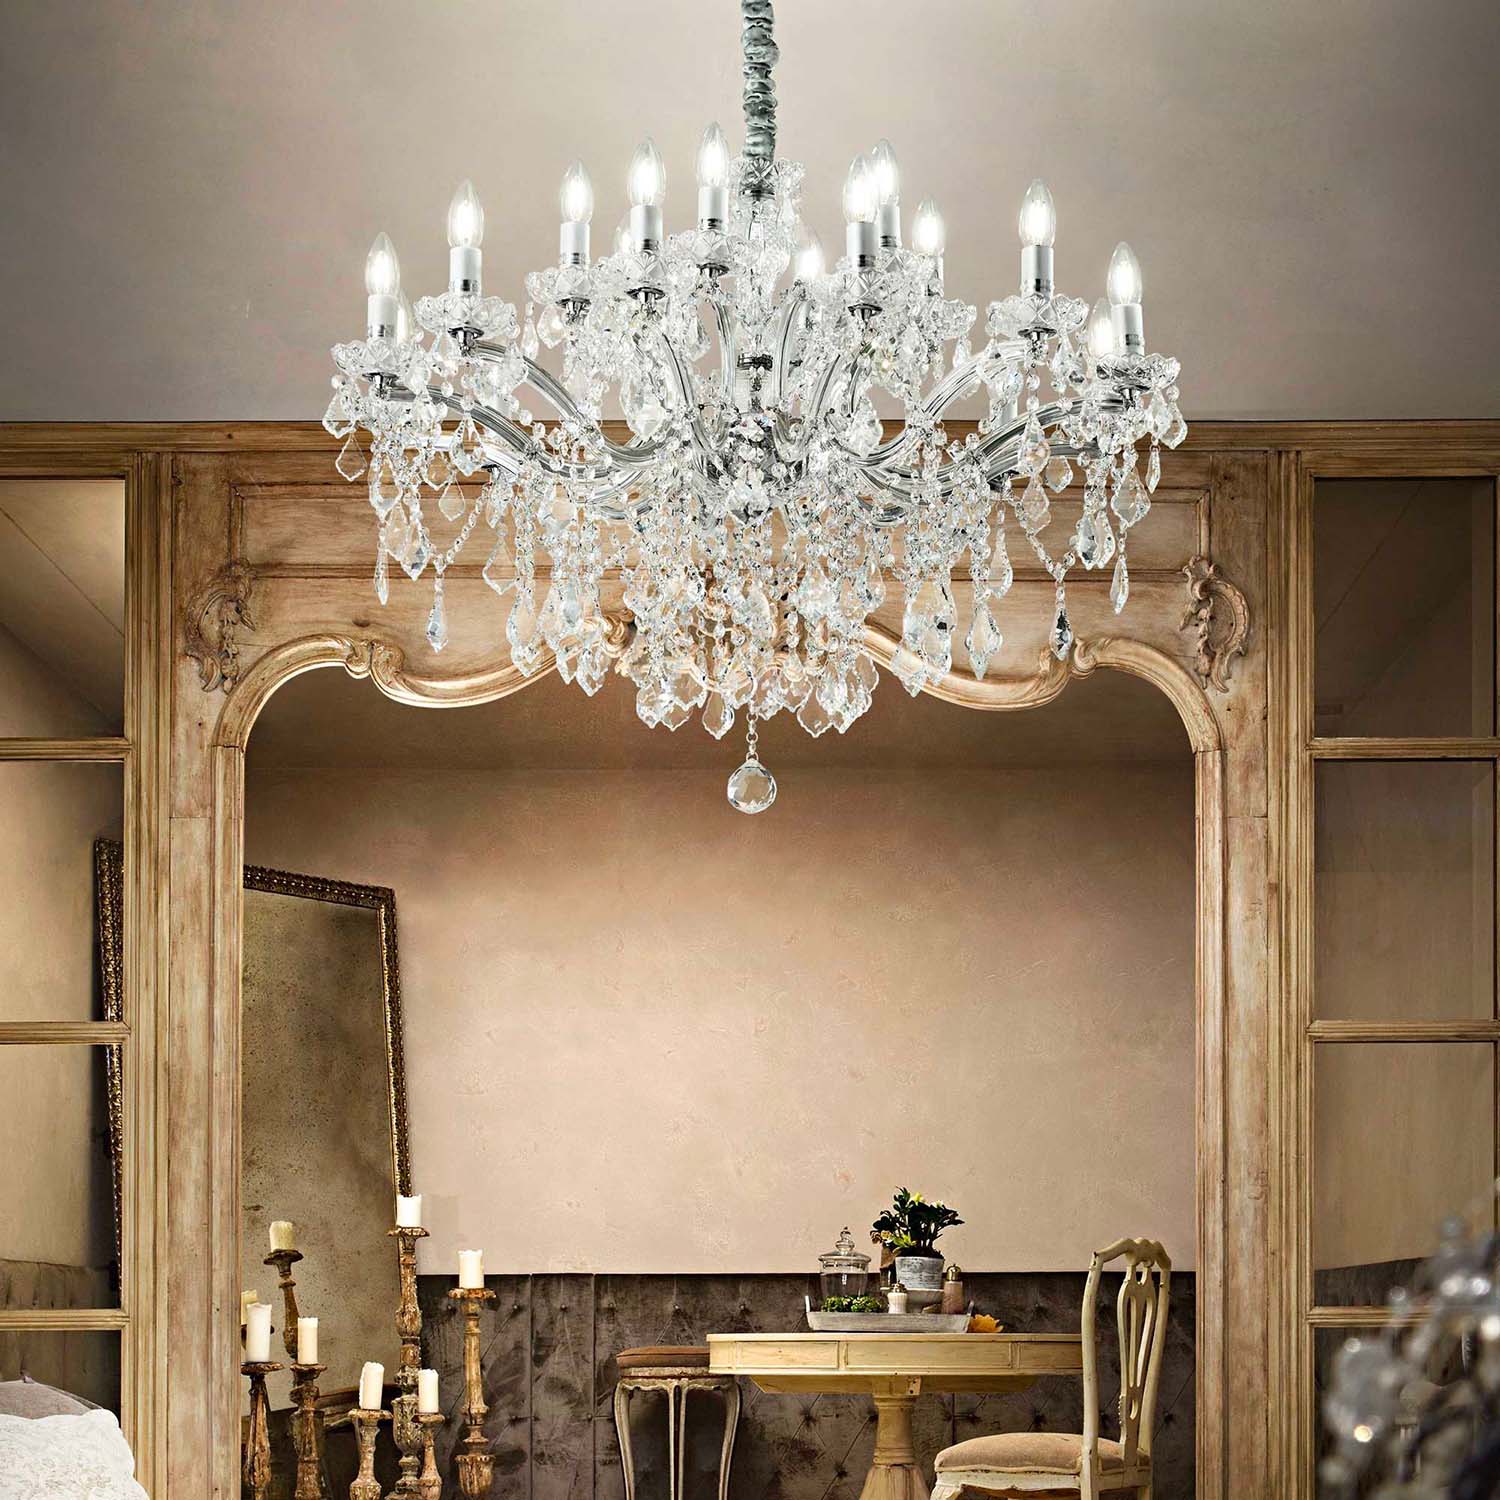 FLORIAN - Chandelier with gold or silver tassels